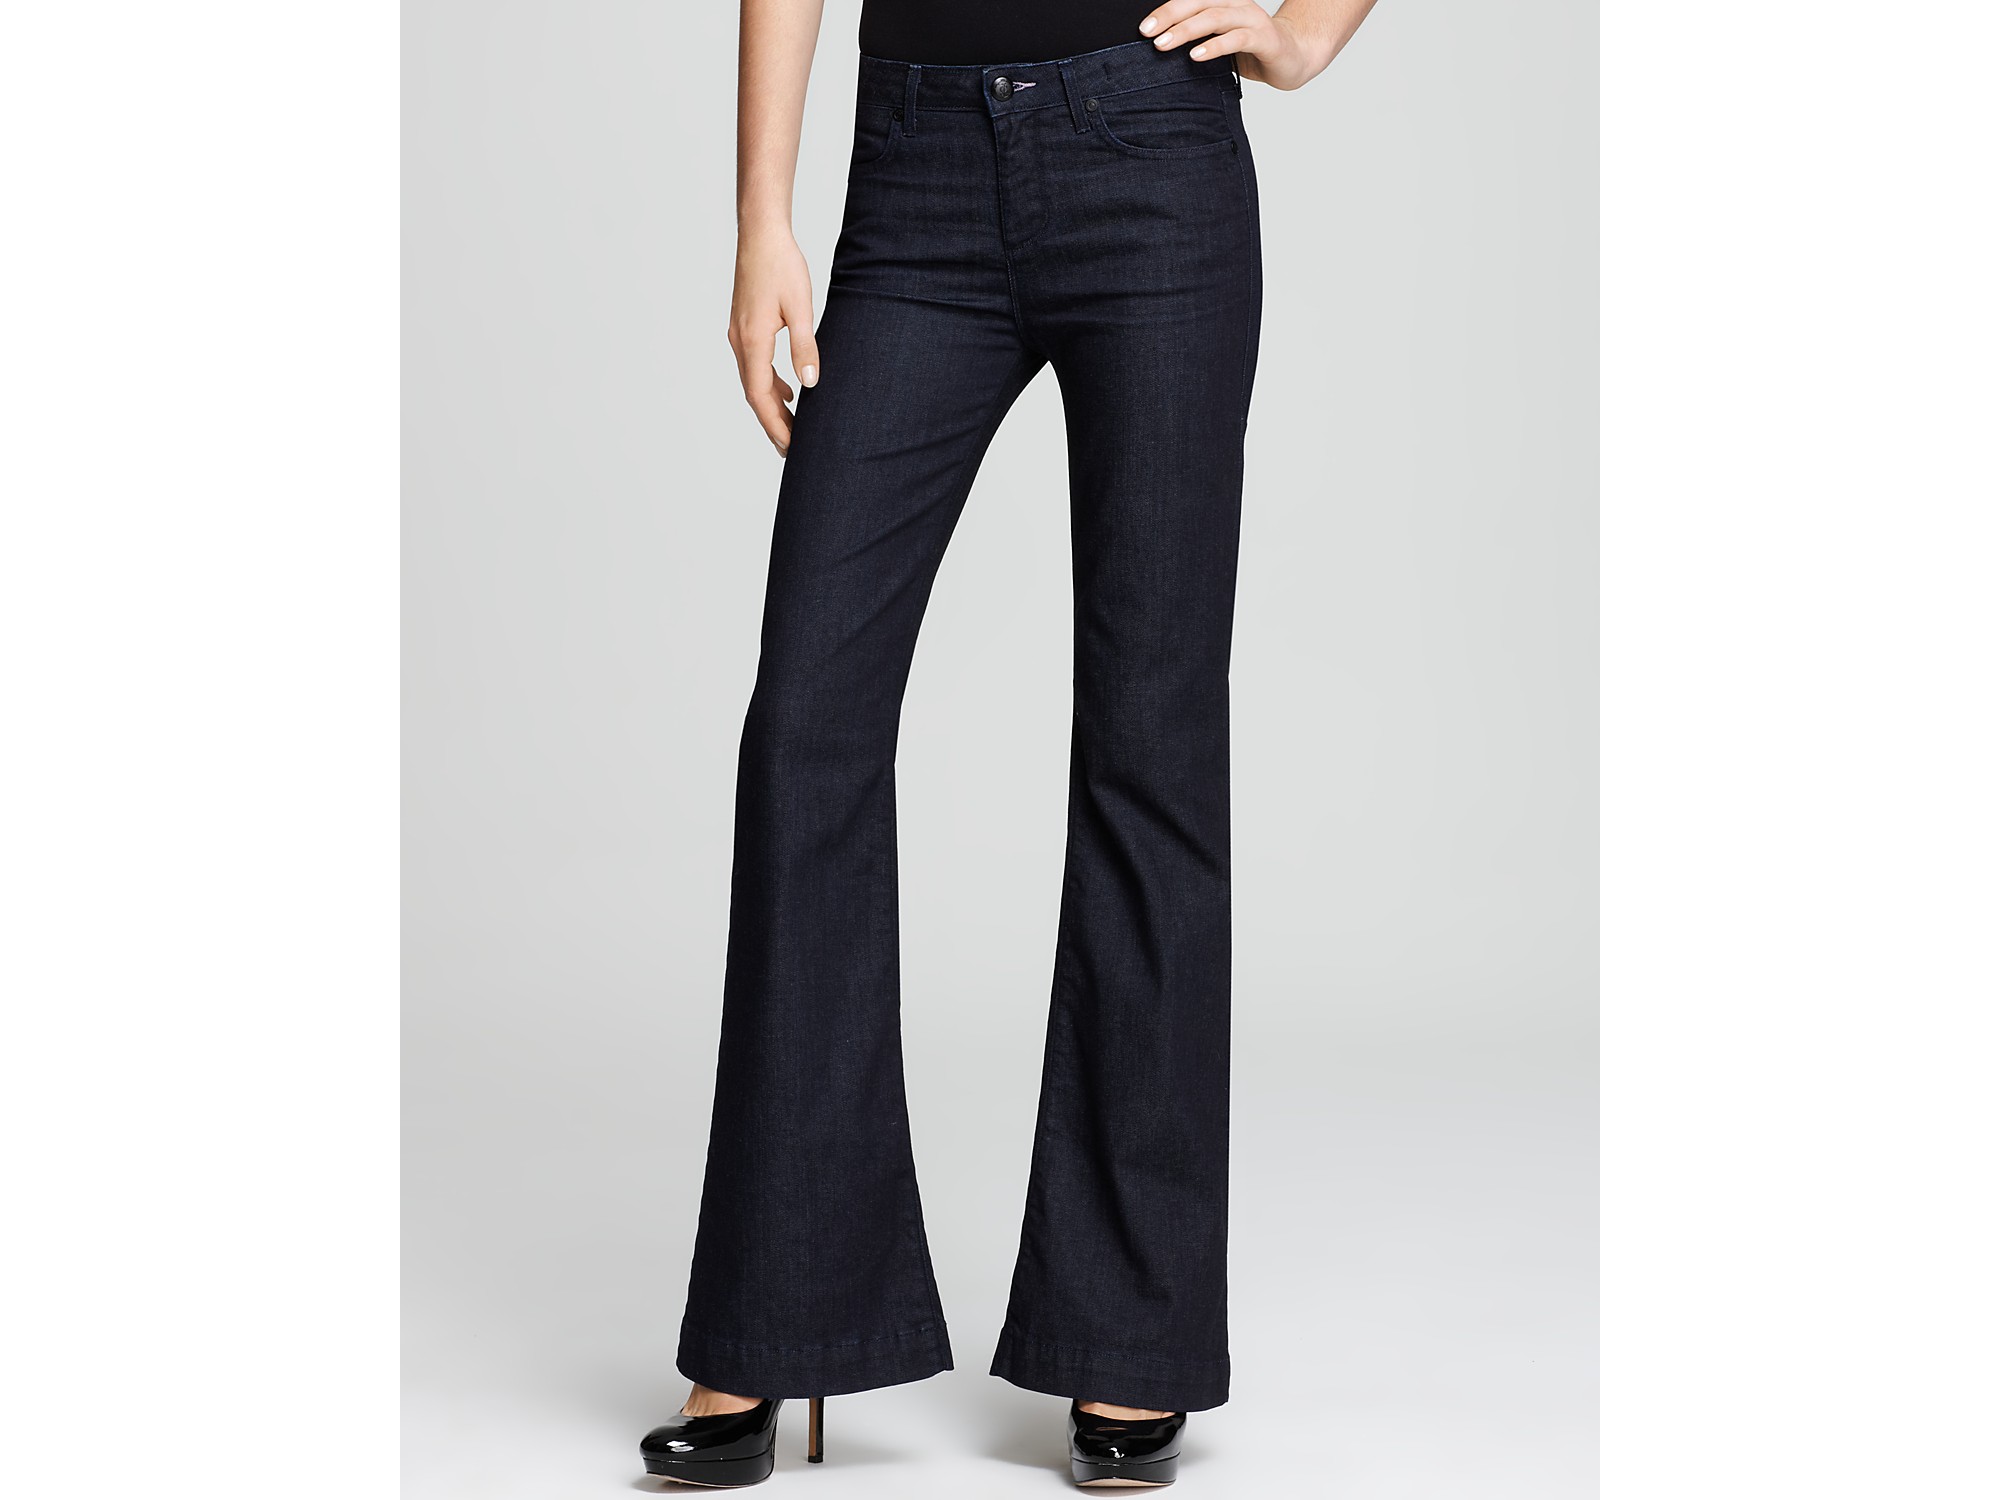 Lyst - Juicy couture High Rise Flared Jeans in Blue